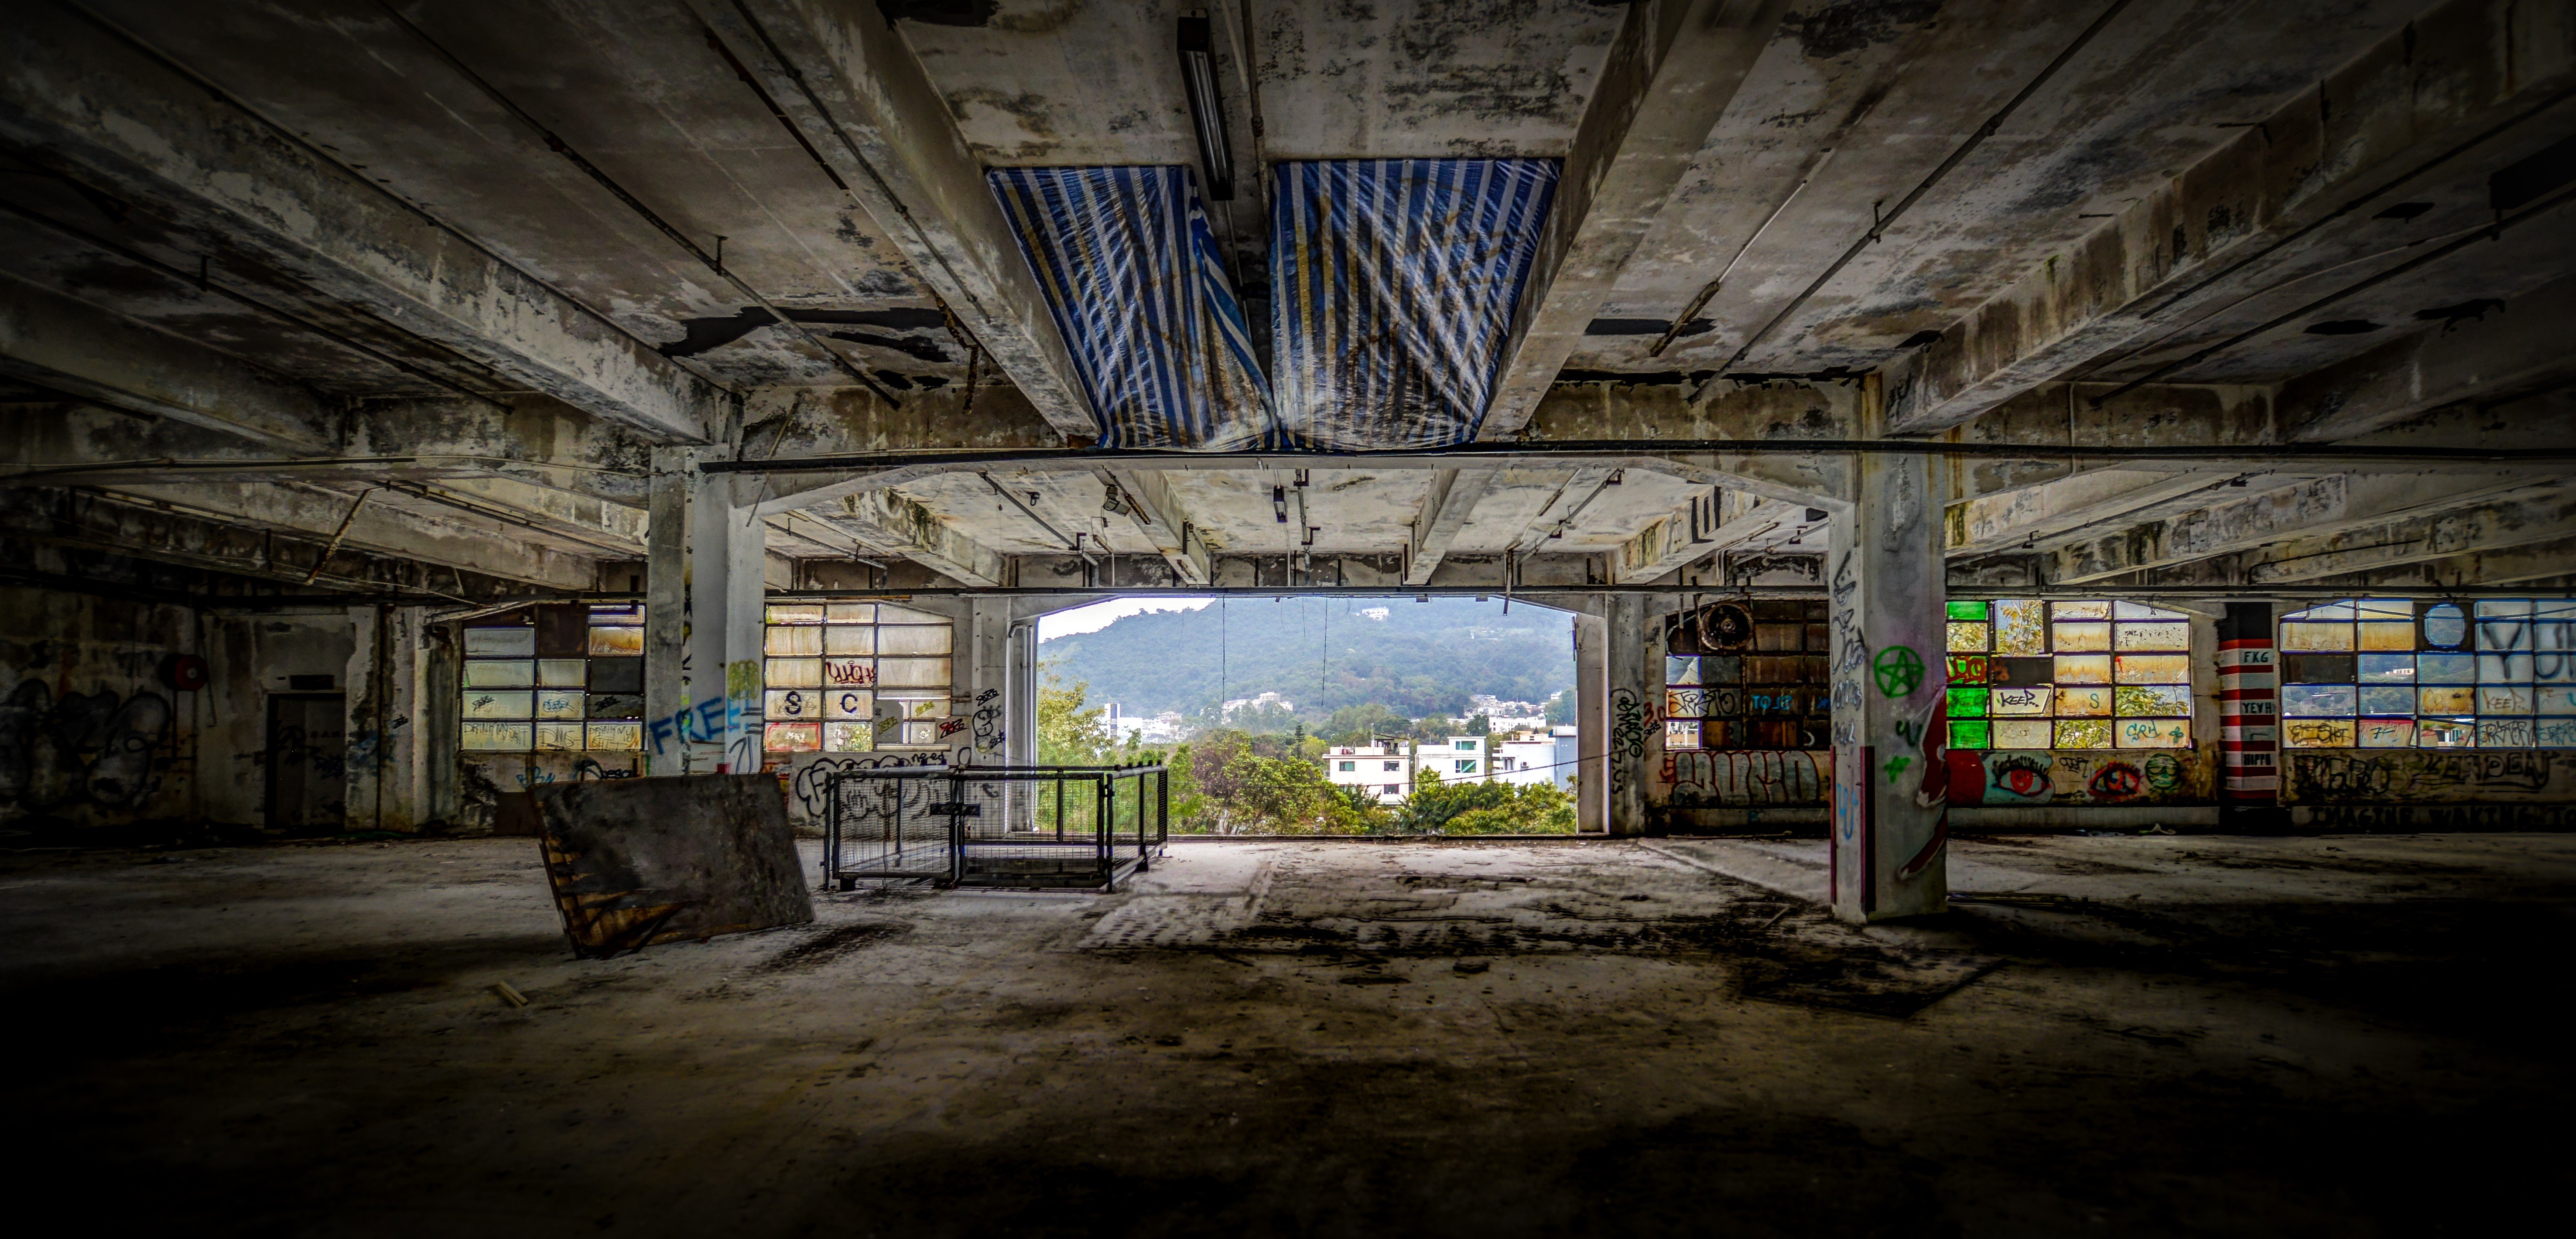 The old Asia Television (ATV) studio building, in Ho Chung, Sai Kung. Photo: HK Urbex